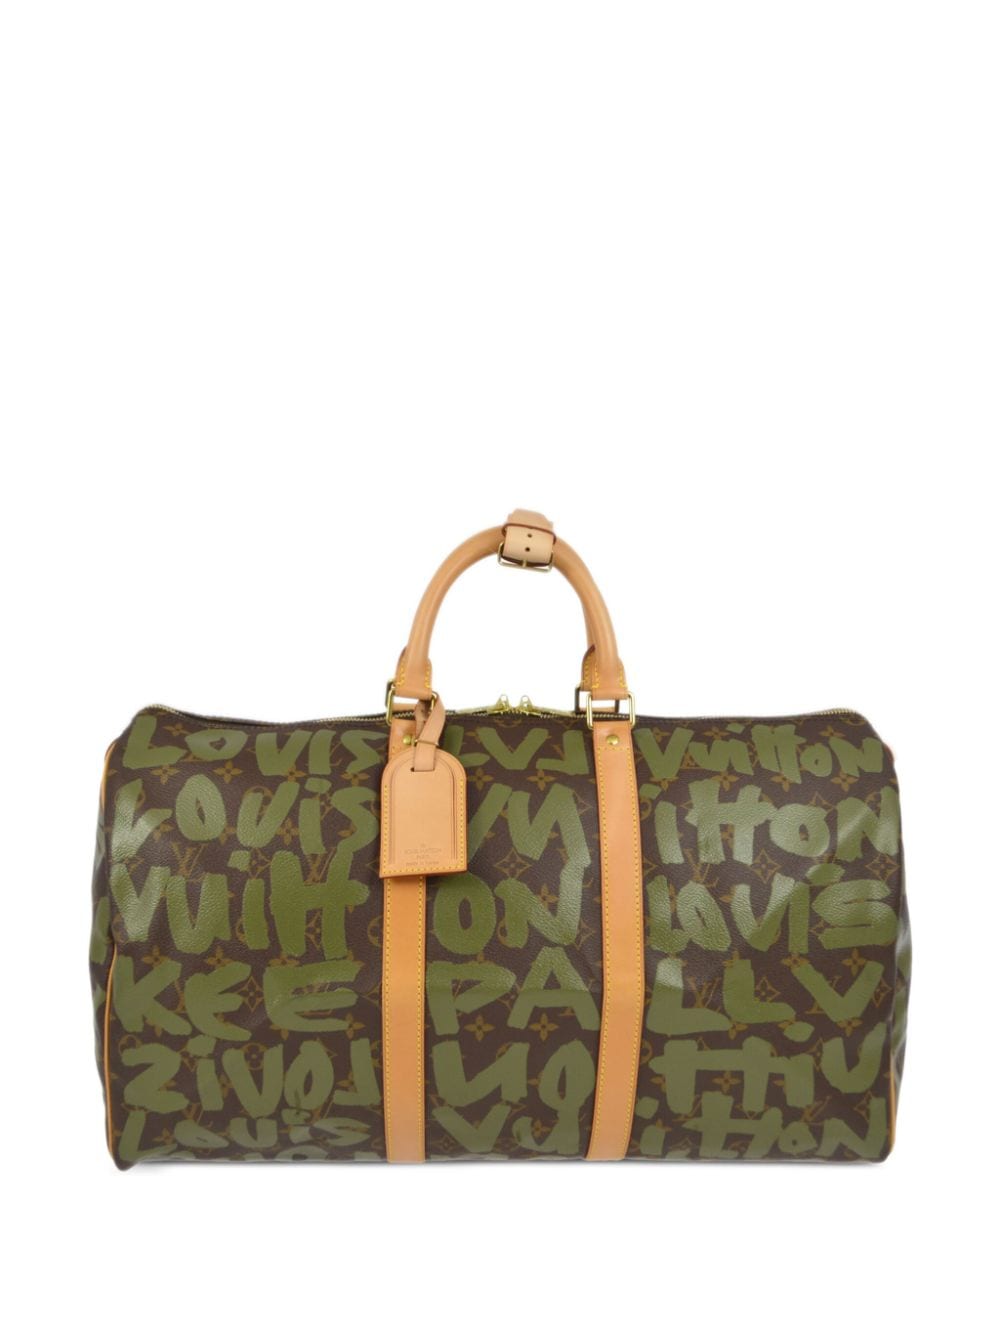 Louis Vuitton Pre-Owned 2001 pre-owned Keepall 50 duffle bag - Green von Louis Vuitton Pre-Owned